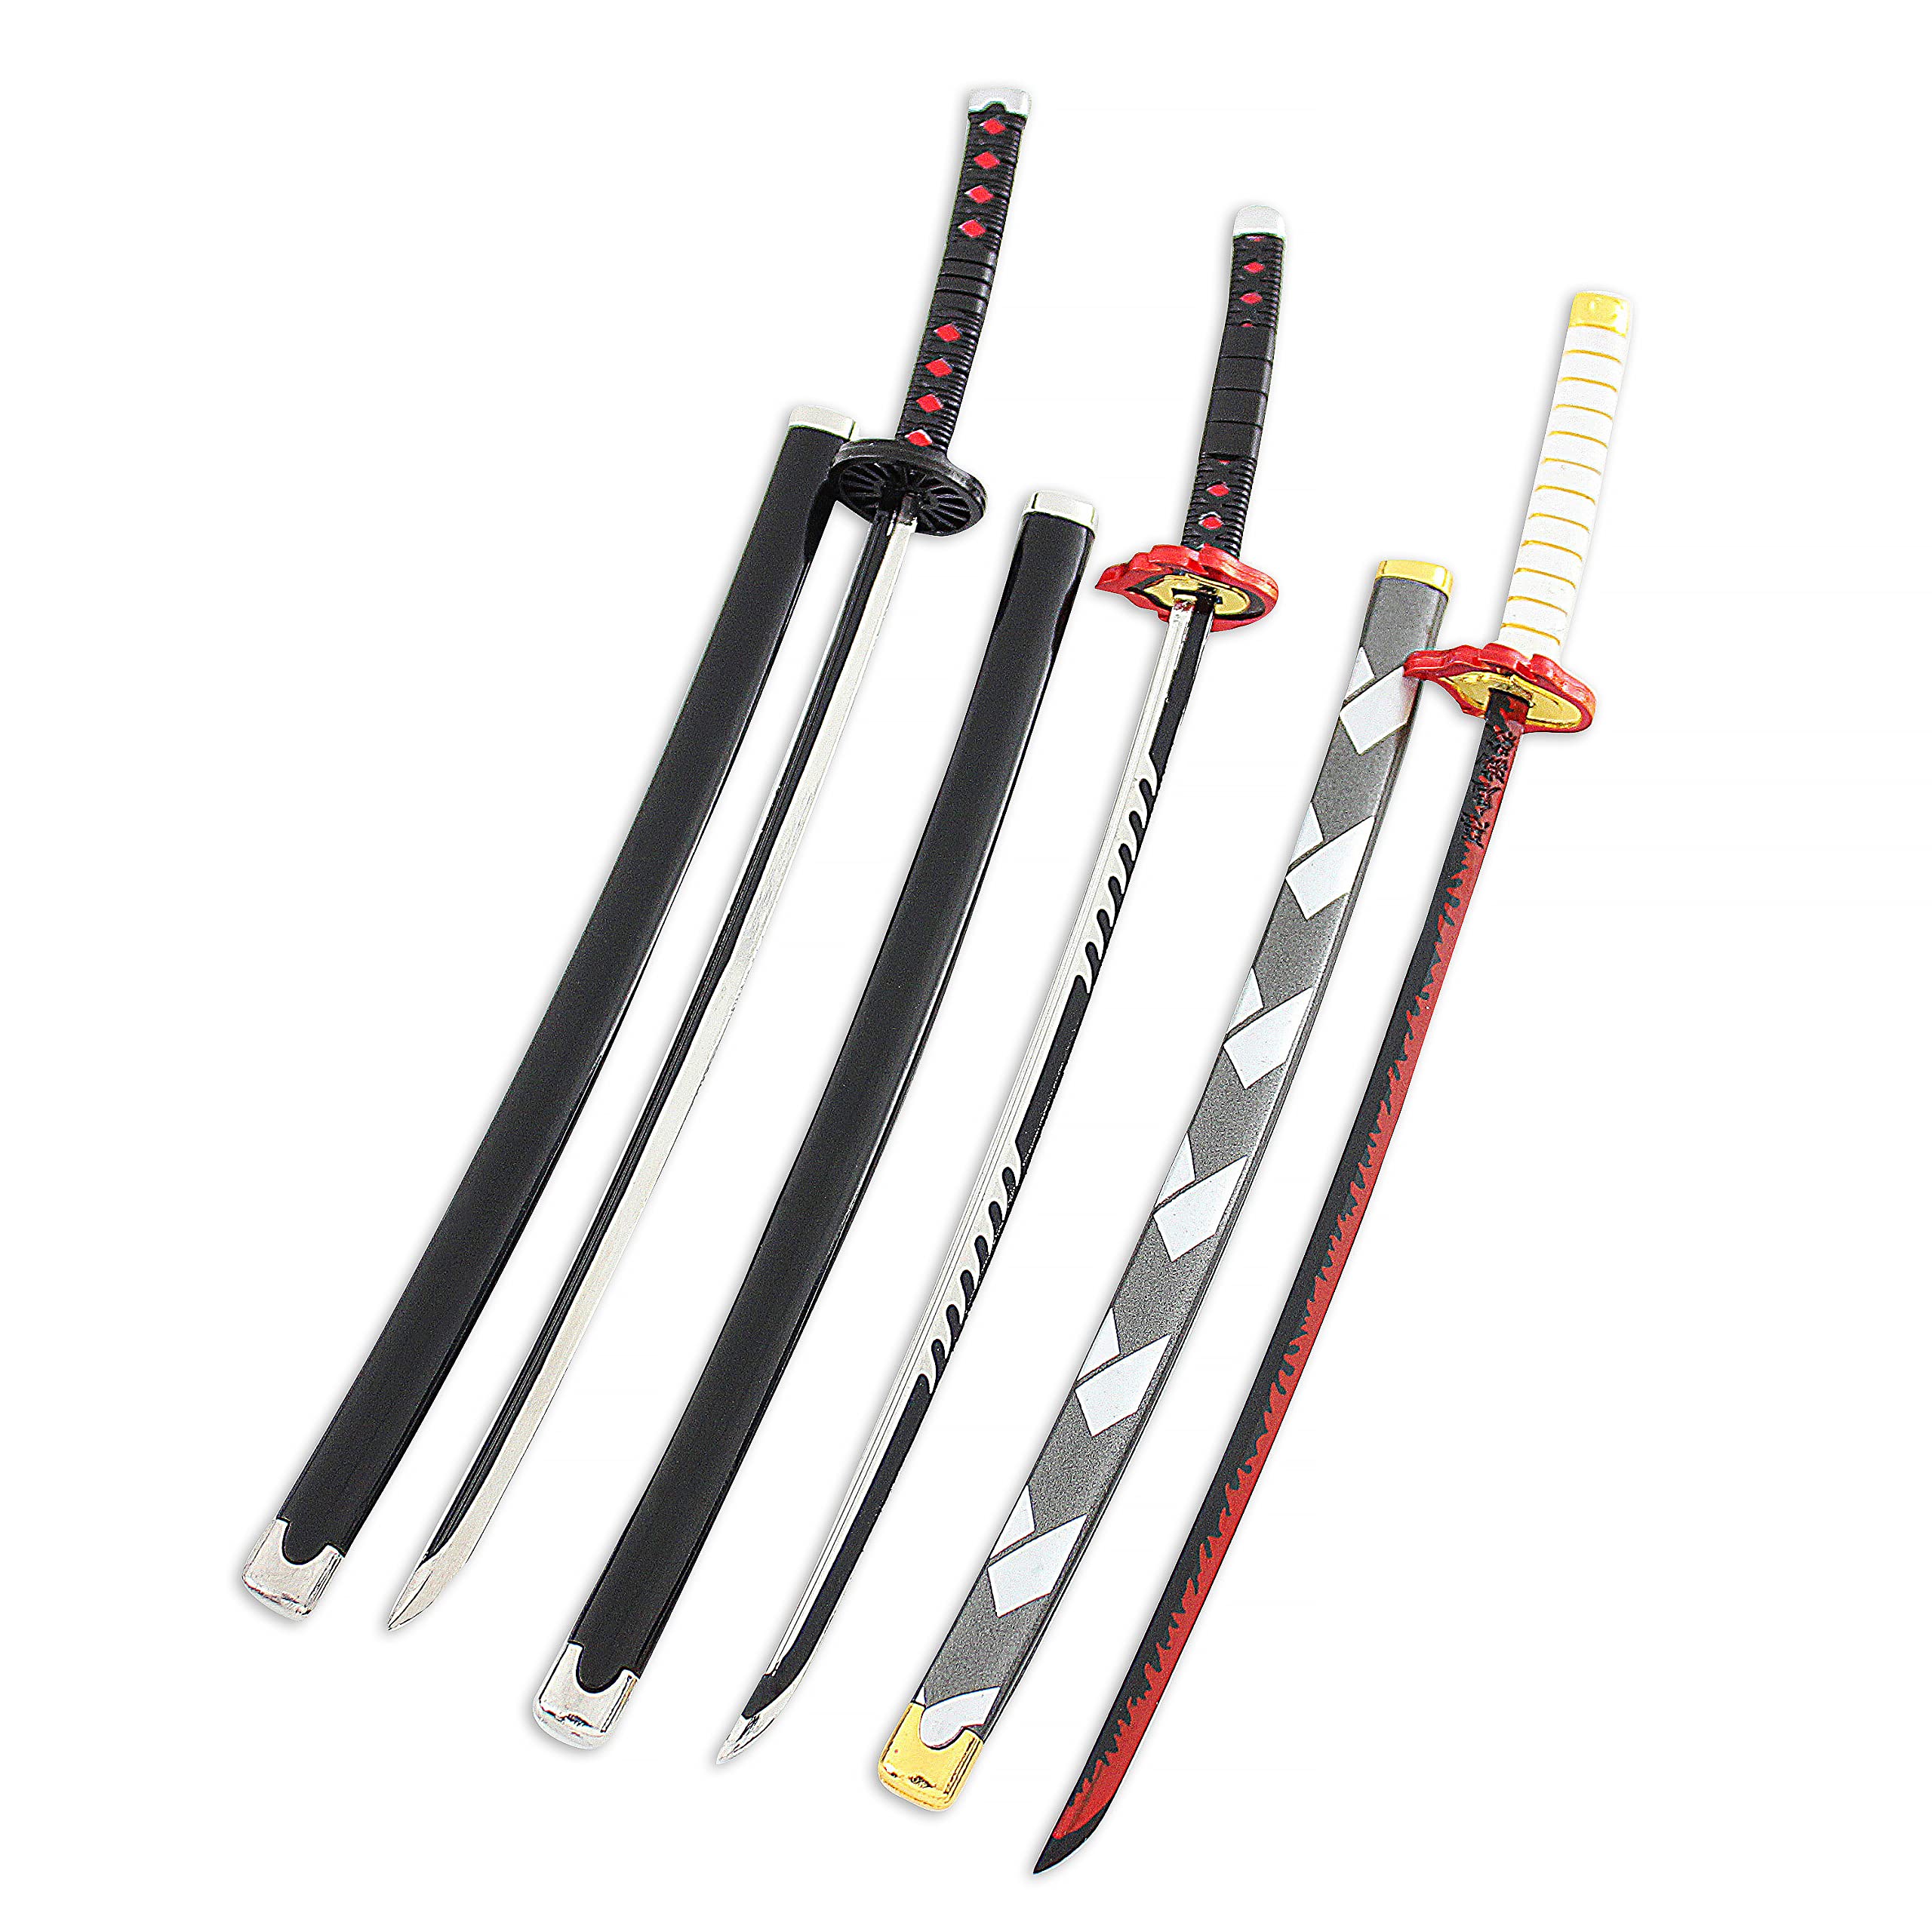 DEEGGHD for Game Anime Lovers,Genshin Impact Sword Cosplay Anime Sword,Weapon  Model Anime Gifts,Pu Sword Anime Cartoon/Red / 100cm/39.3in : Amazon.co.uk:  Toys & Games